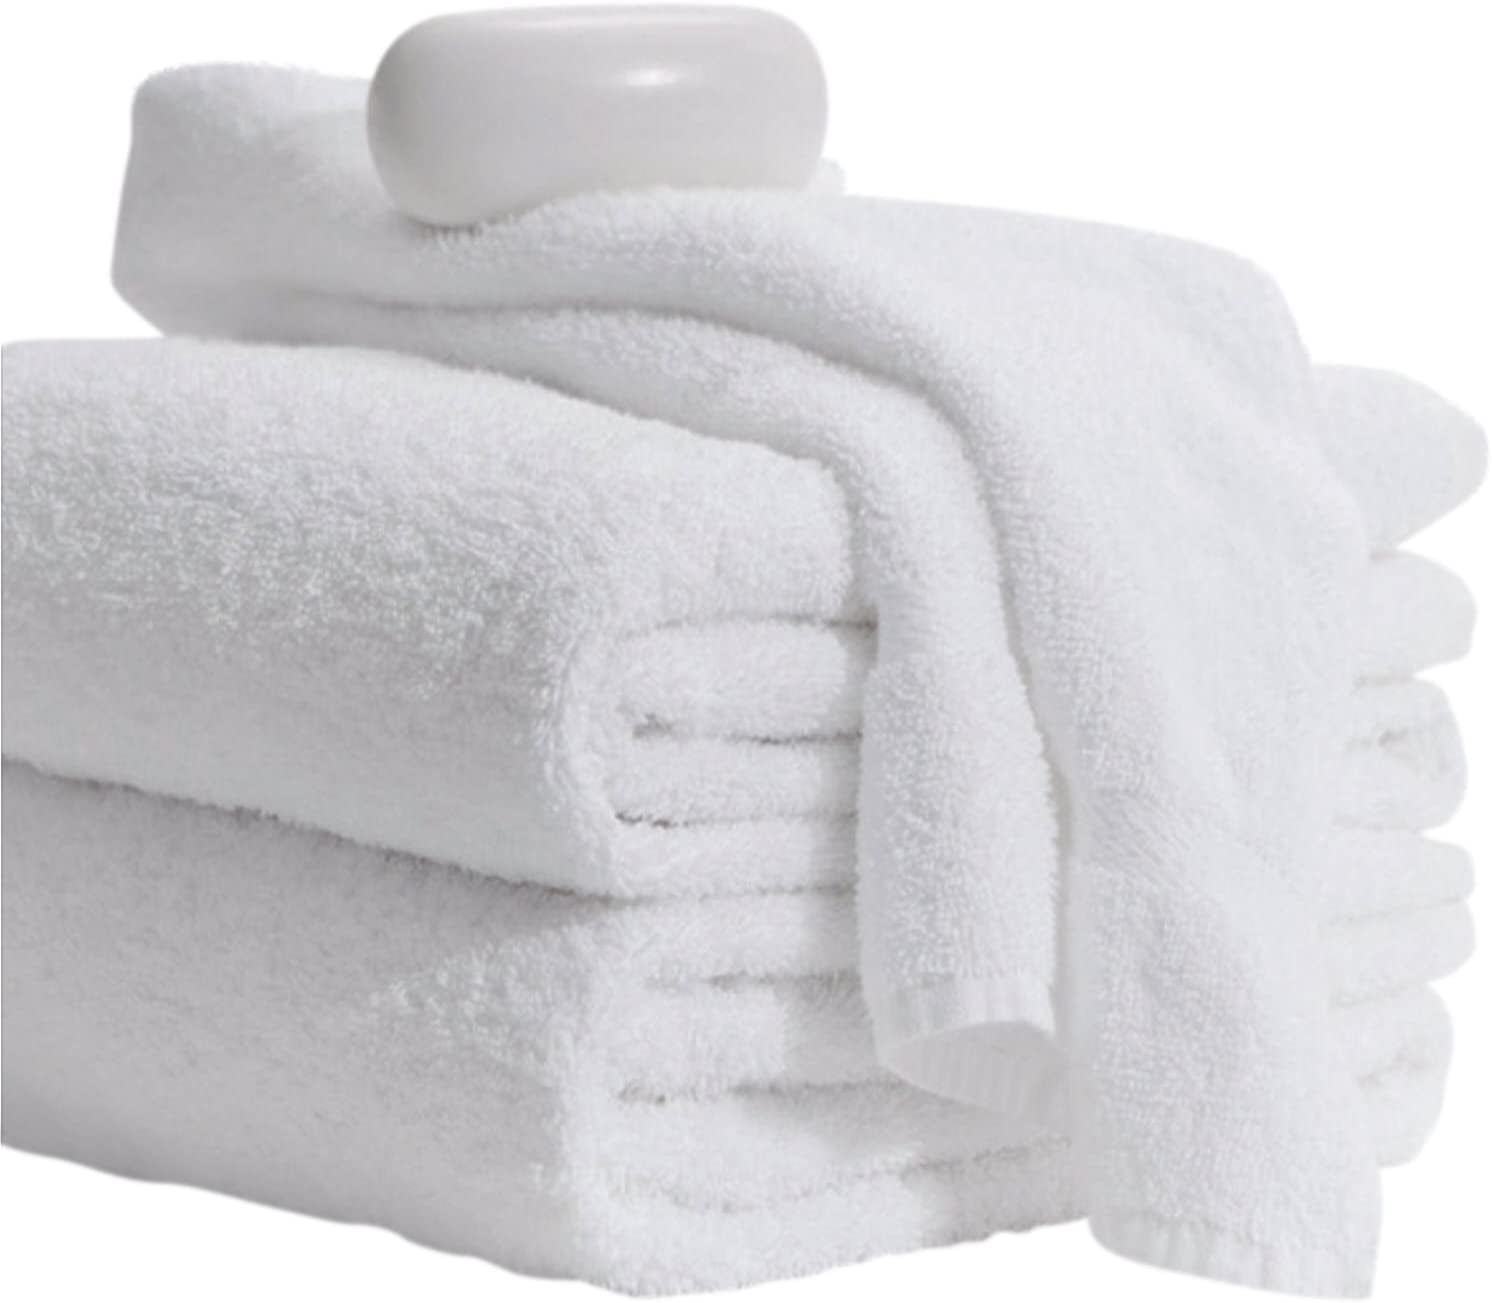 MIMAATEX Basic Towels-20x40 inches-6 Pack-White-100% Cotton- Hair